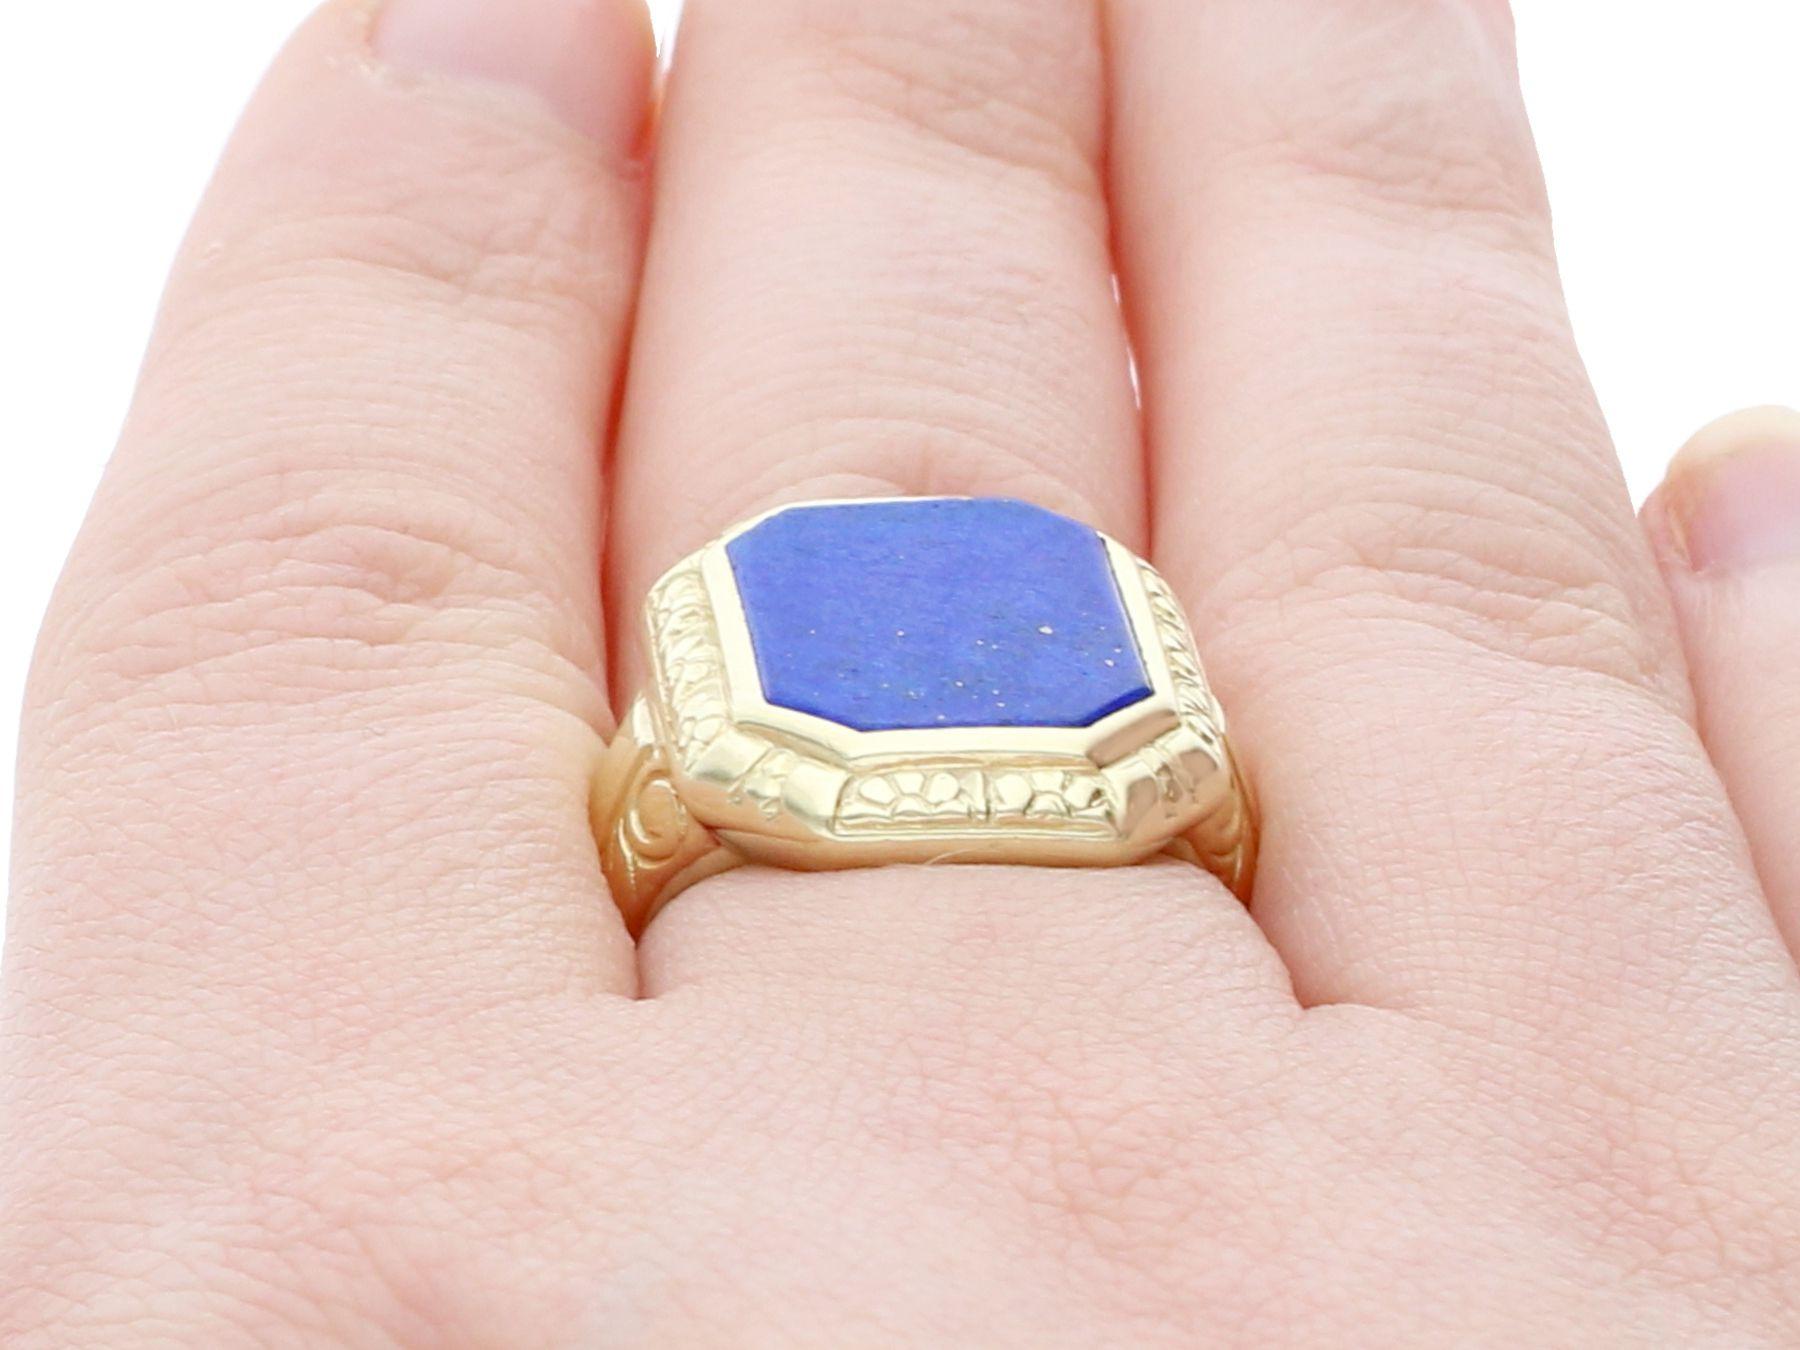 Antique 2.21Ct Lapis Lazuli and 14k Yellow Gold Signet Ring For Sale 1